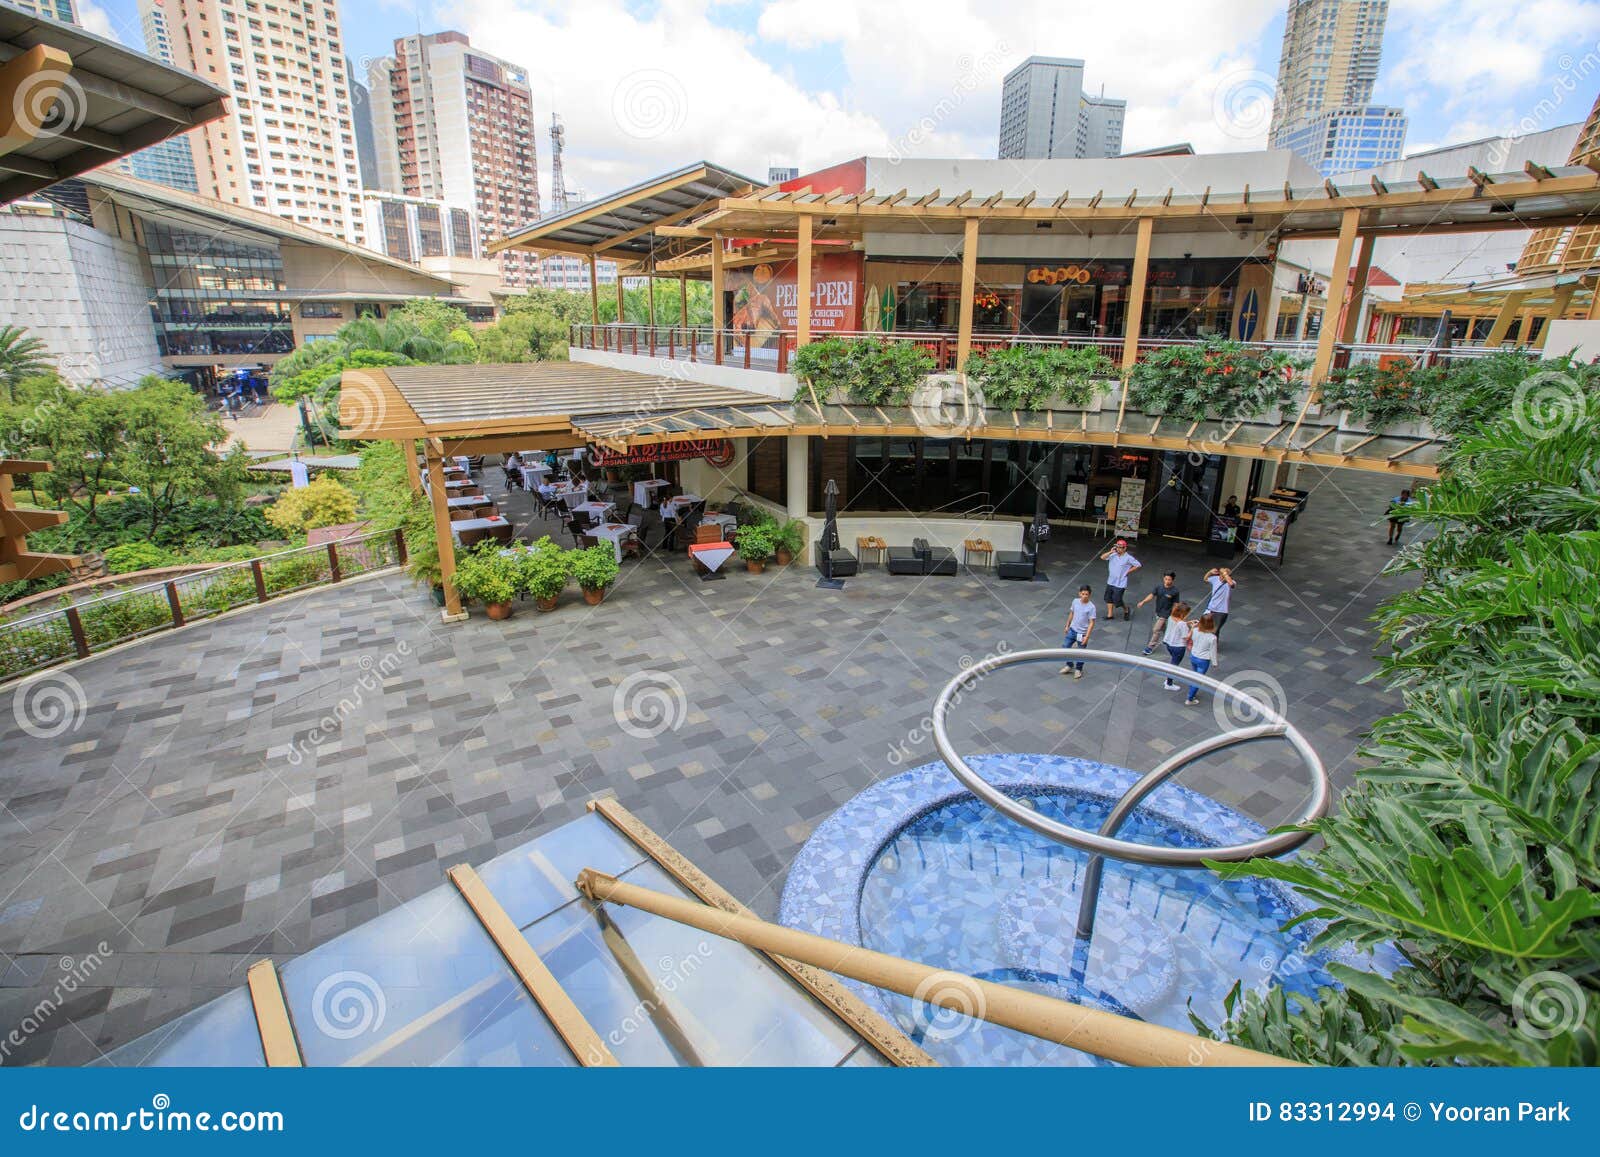 Greenbelt is a shopping mall in Makati, Manila owned by Ayala Malls News  Photo - Getty Images